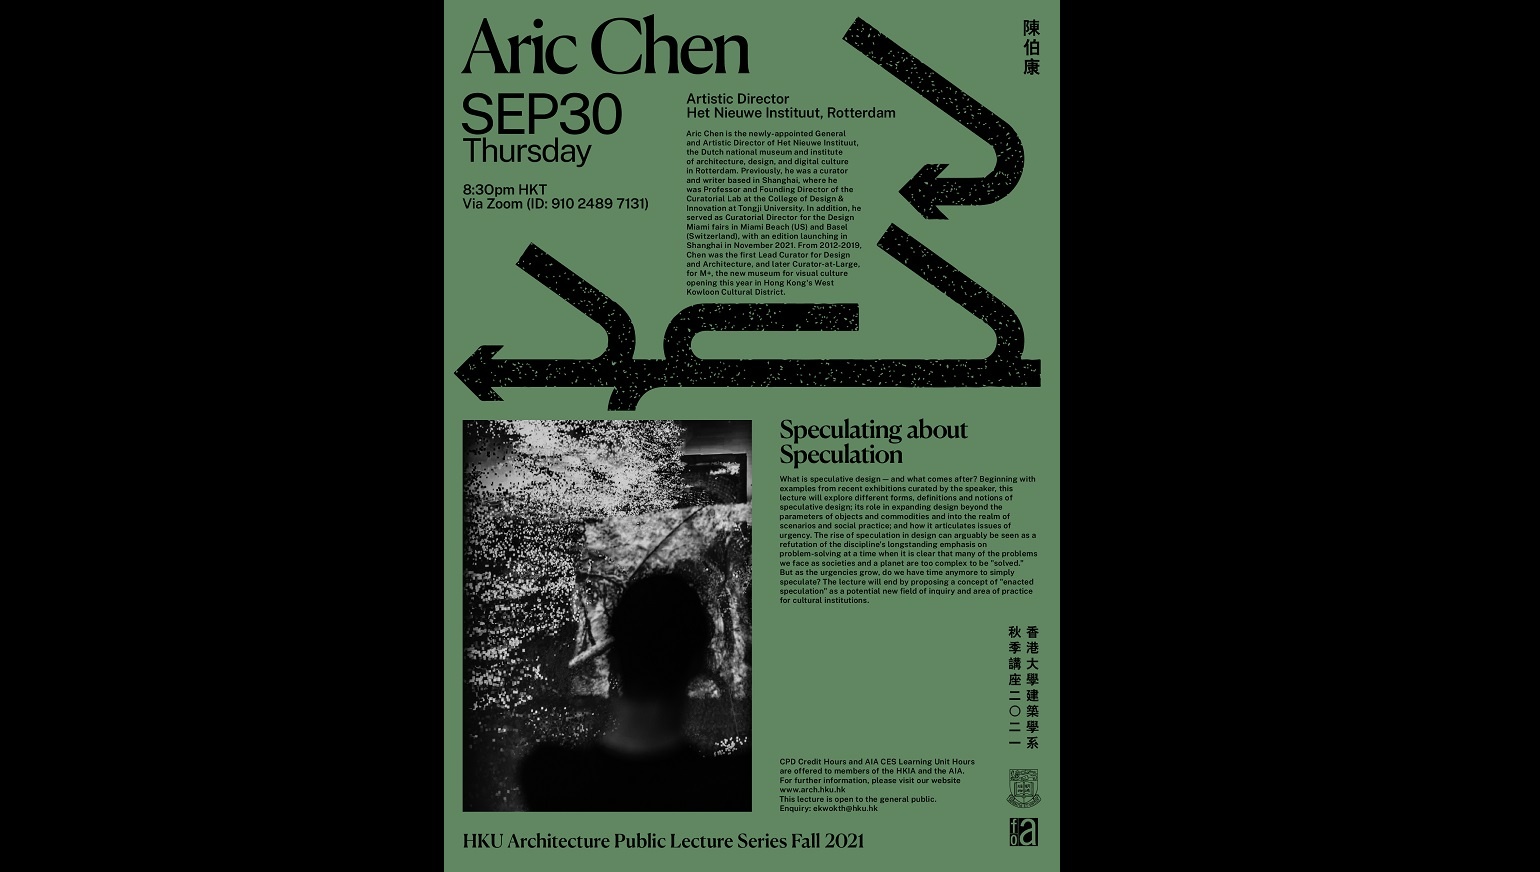 Public Lecture: 'Speculating about Speculation' by Aric Chen